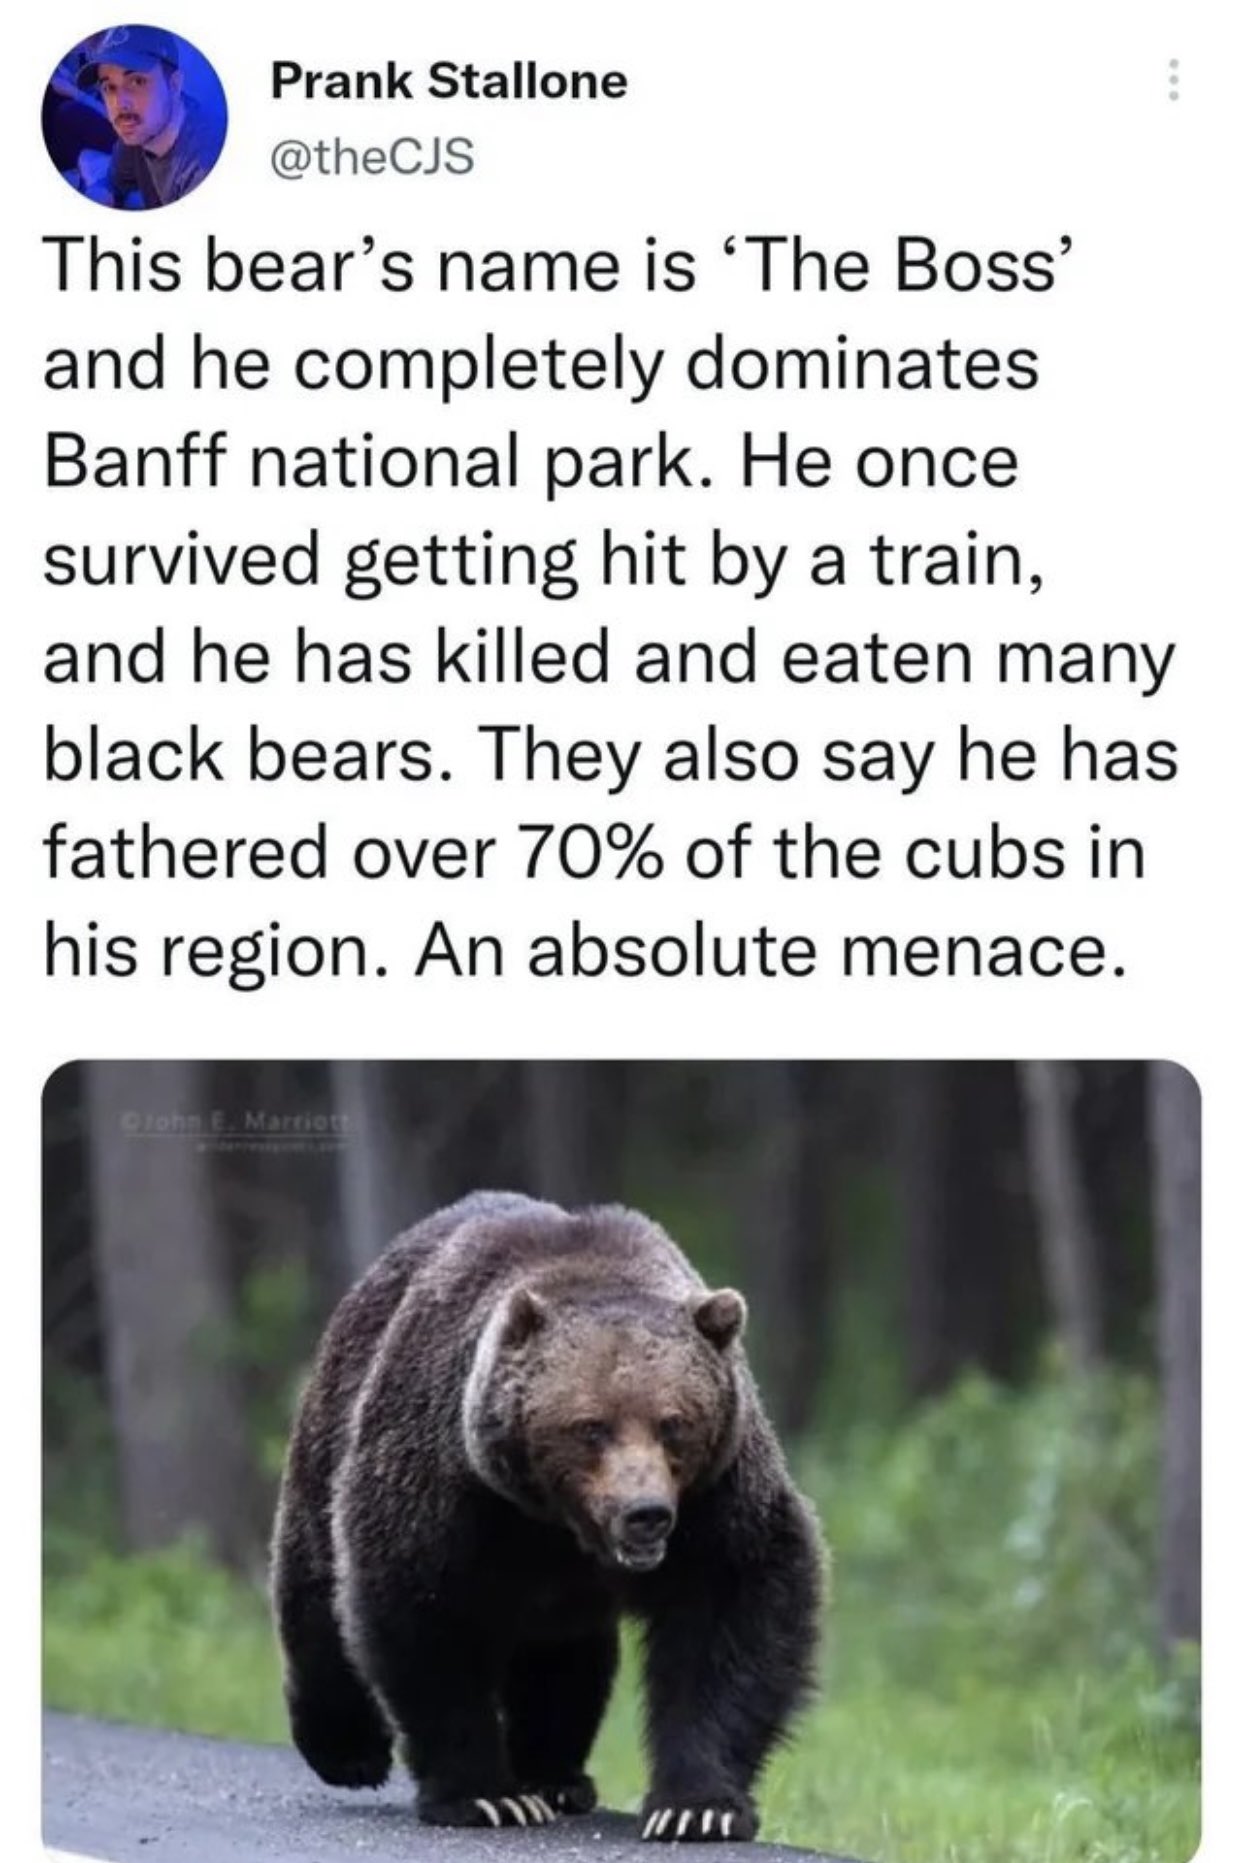 dudes posting their w's - fauna - Prank Stallone This bear's name is 'The Boss' and he completely dominates. Banff national park. He once survived getting hit by a train, and he has killed and eaten many black bears. They also say he has fathered over 70%